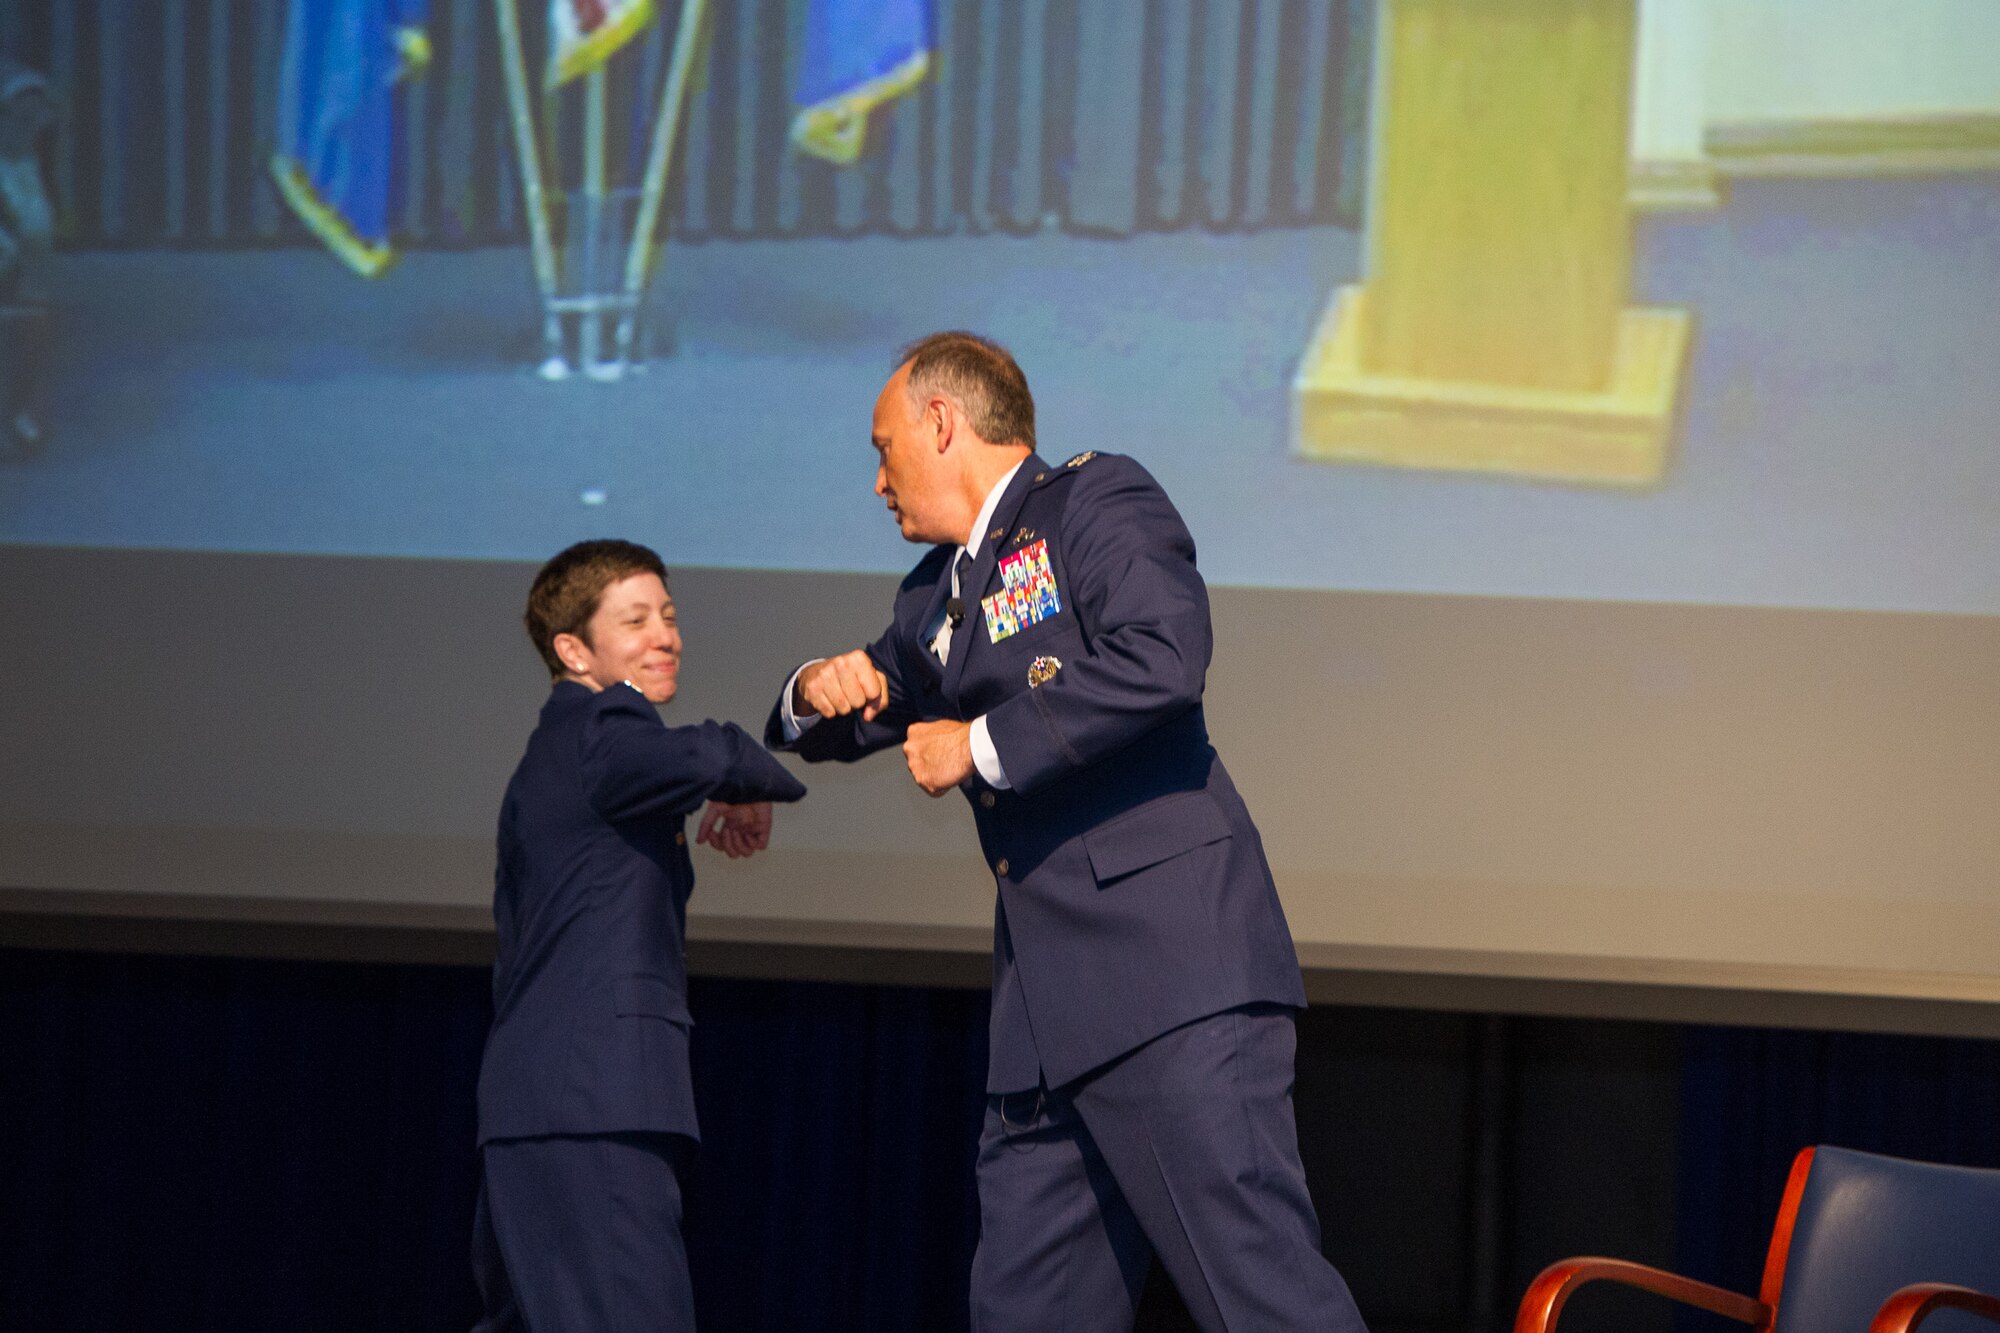 To avoid direct contact due to the coronavirus pandemic, incoming commander Col. Katharine Barber (left) bumps elbows with outgoing commander Col. Chad Hartman (right) in place of a handshake during the Air Force Technical Applications Center’s Change of Command ceremony June 30, 2020.  (U.S. Air Force photo by Amanda Ryrholm)